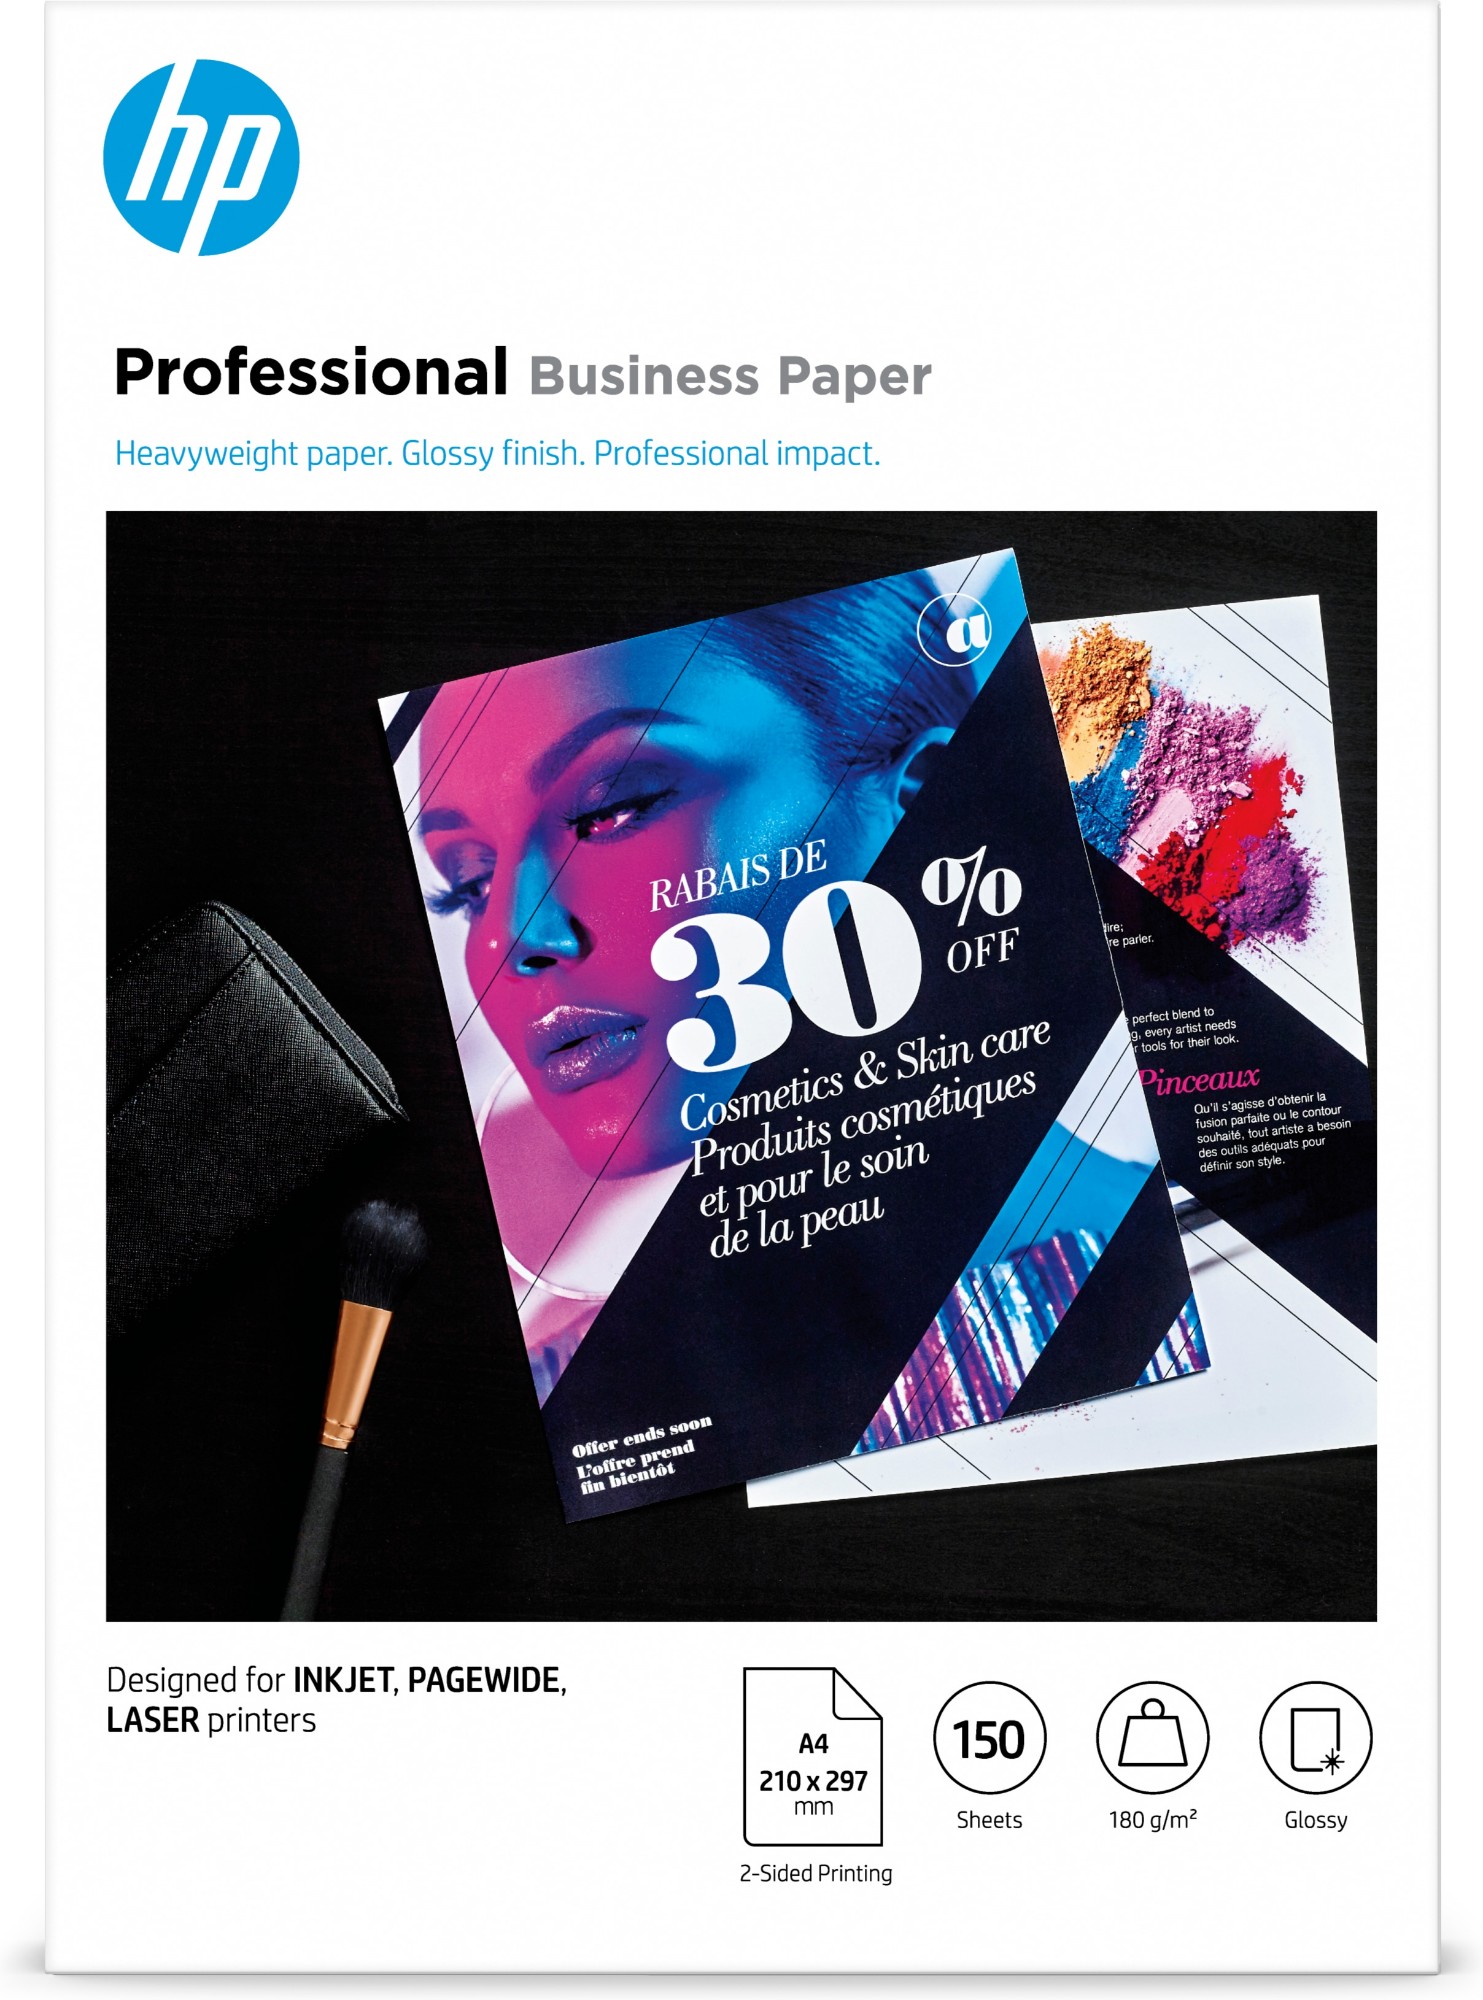 Photos - Office Paper HP Professional Business Paper, Glossy, 180 g/m2, A4 , 1 3VK (210 x 297 mm)